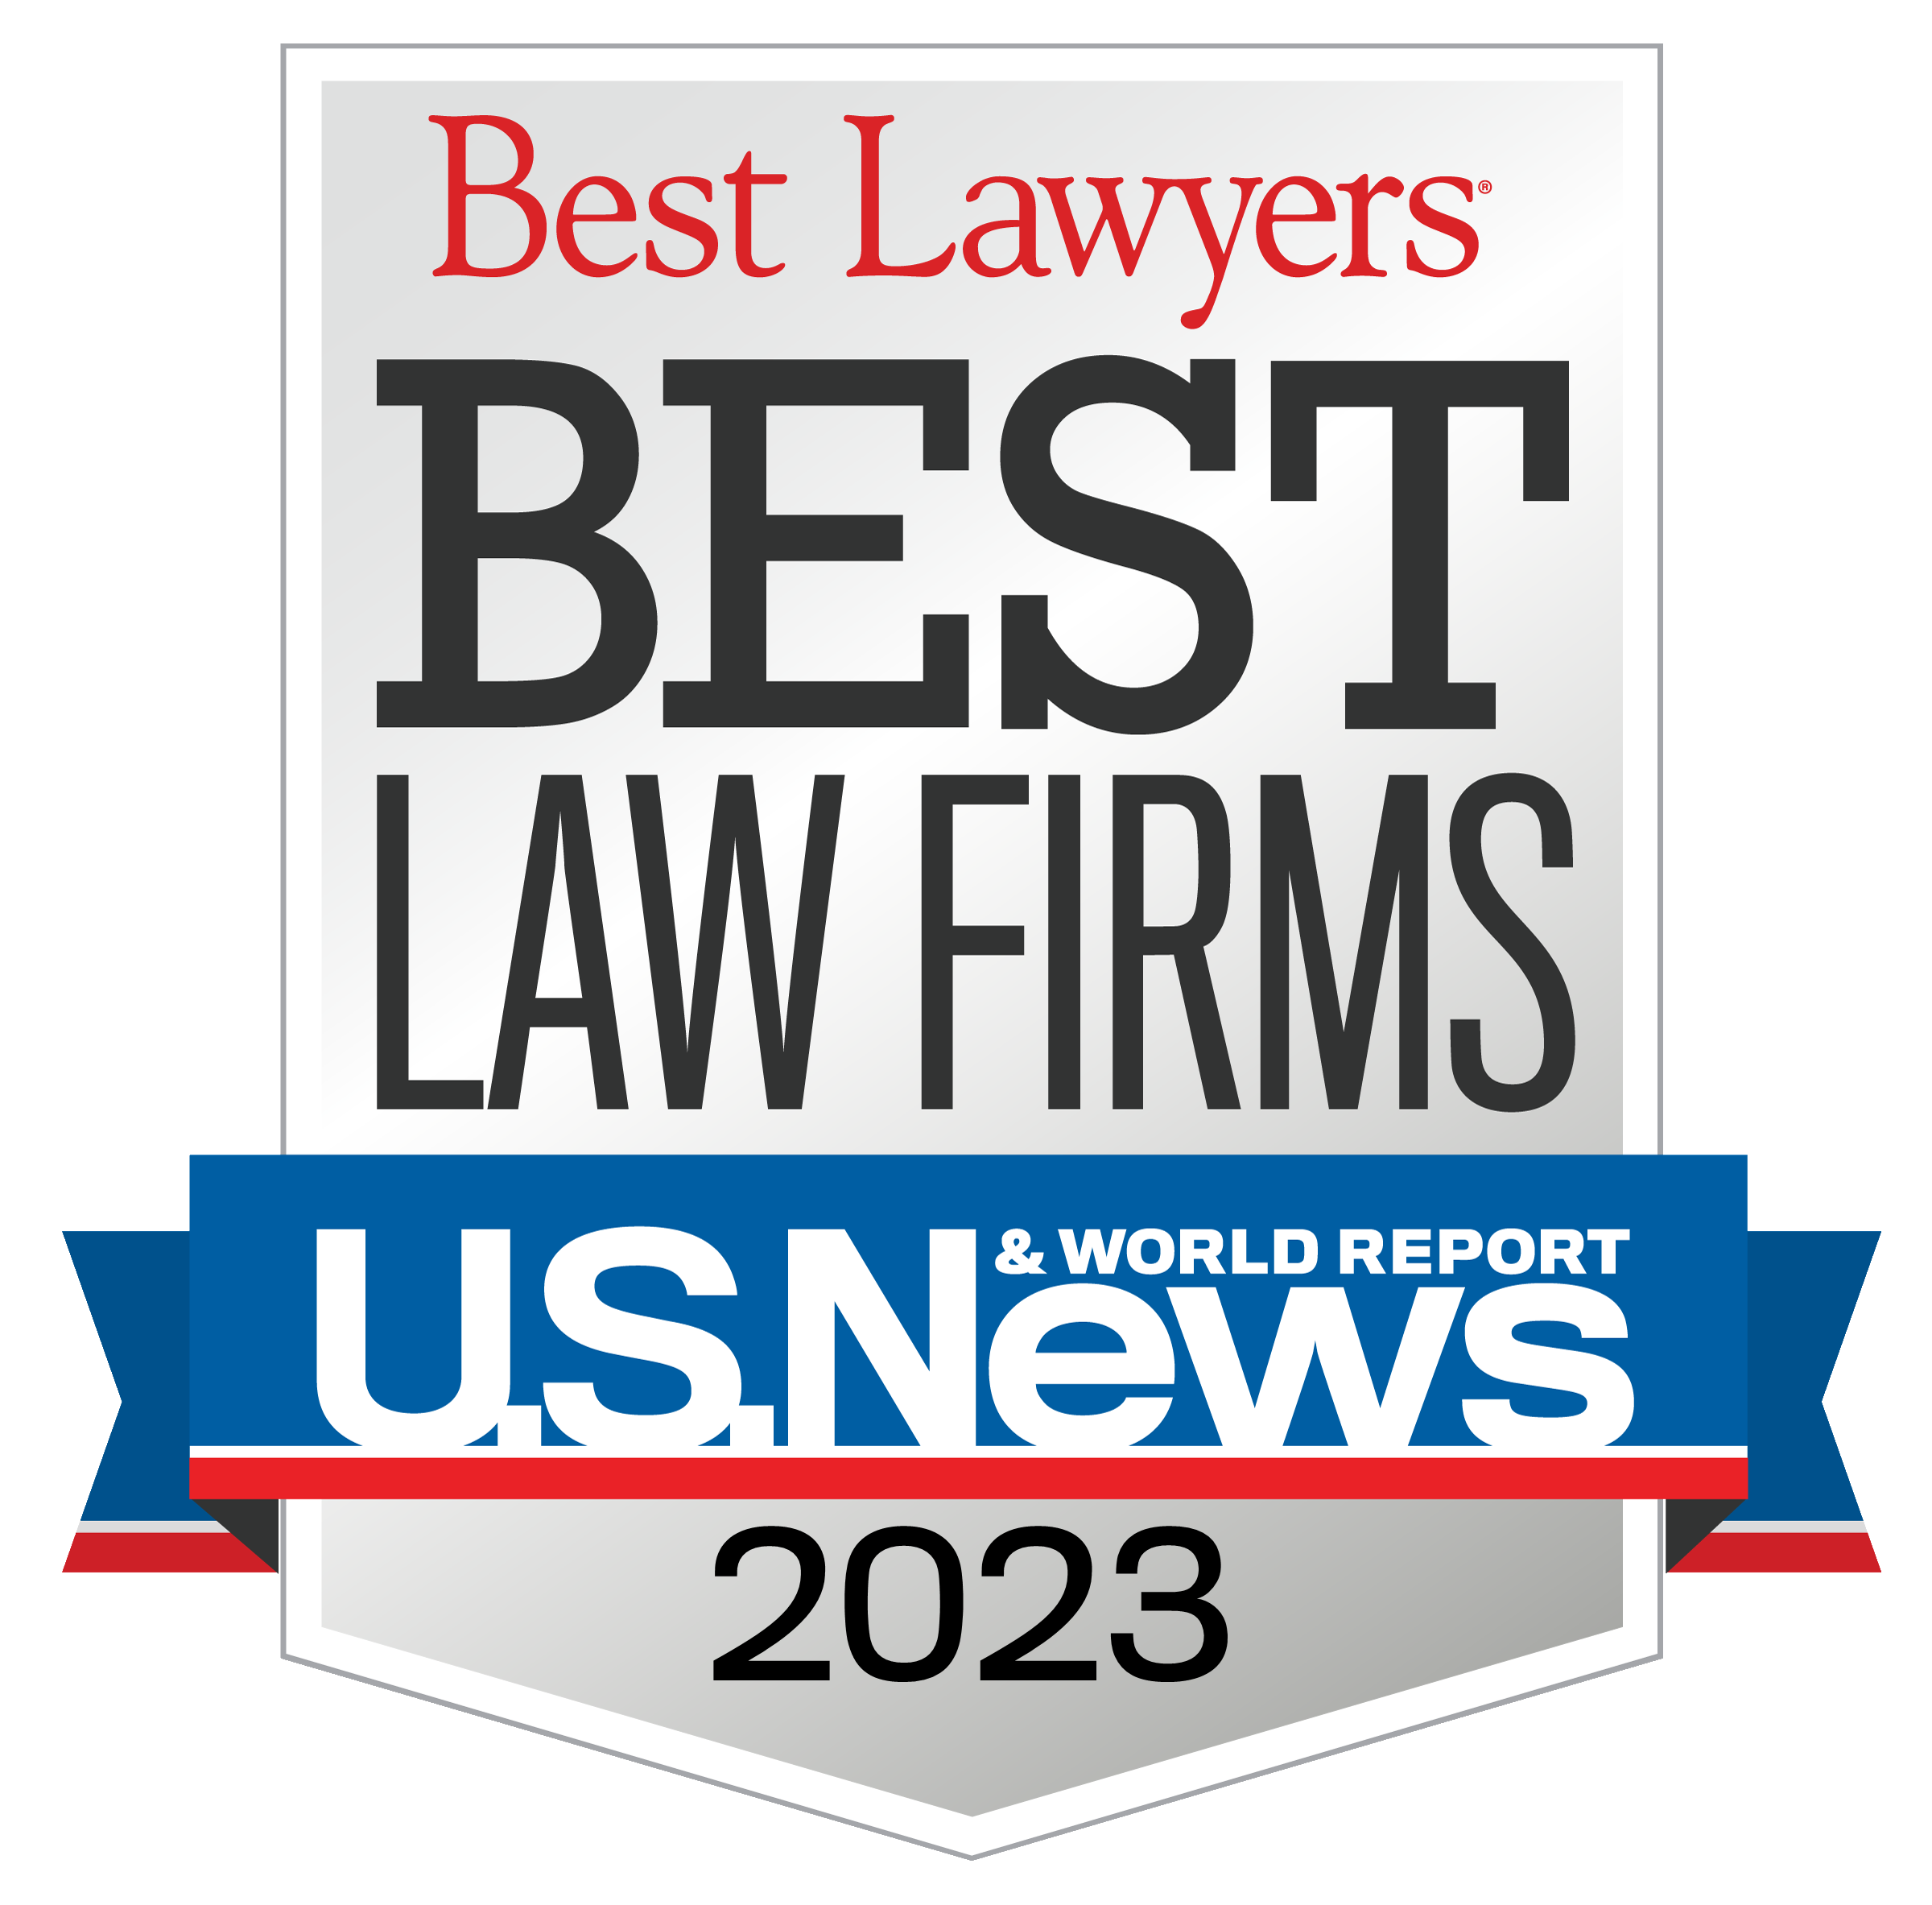 Landau and Simon named Best Lawyers Best Law Firms by US News and World Reports 2023